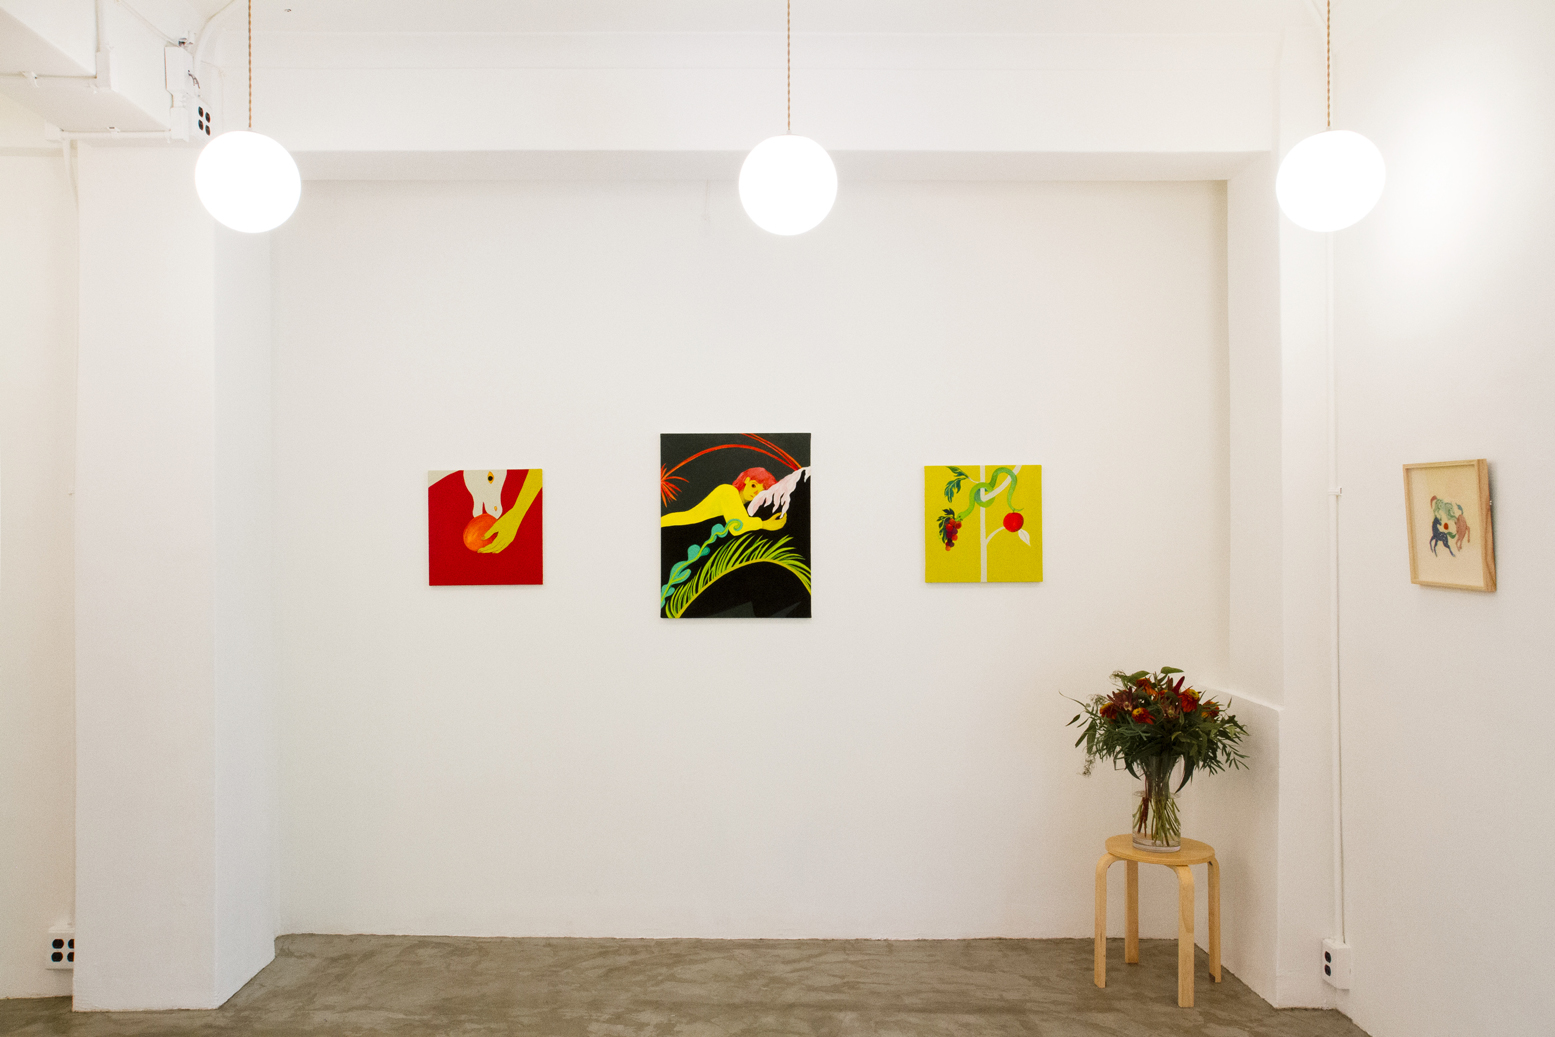 Installation view from “SOFT SPOT” 2023, at Pacifica Collectives